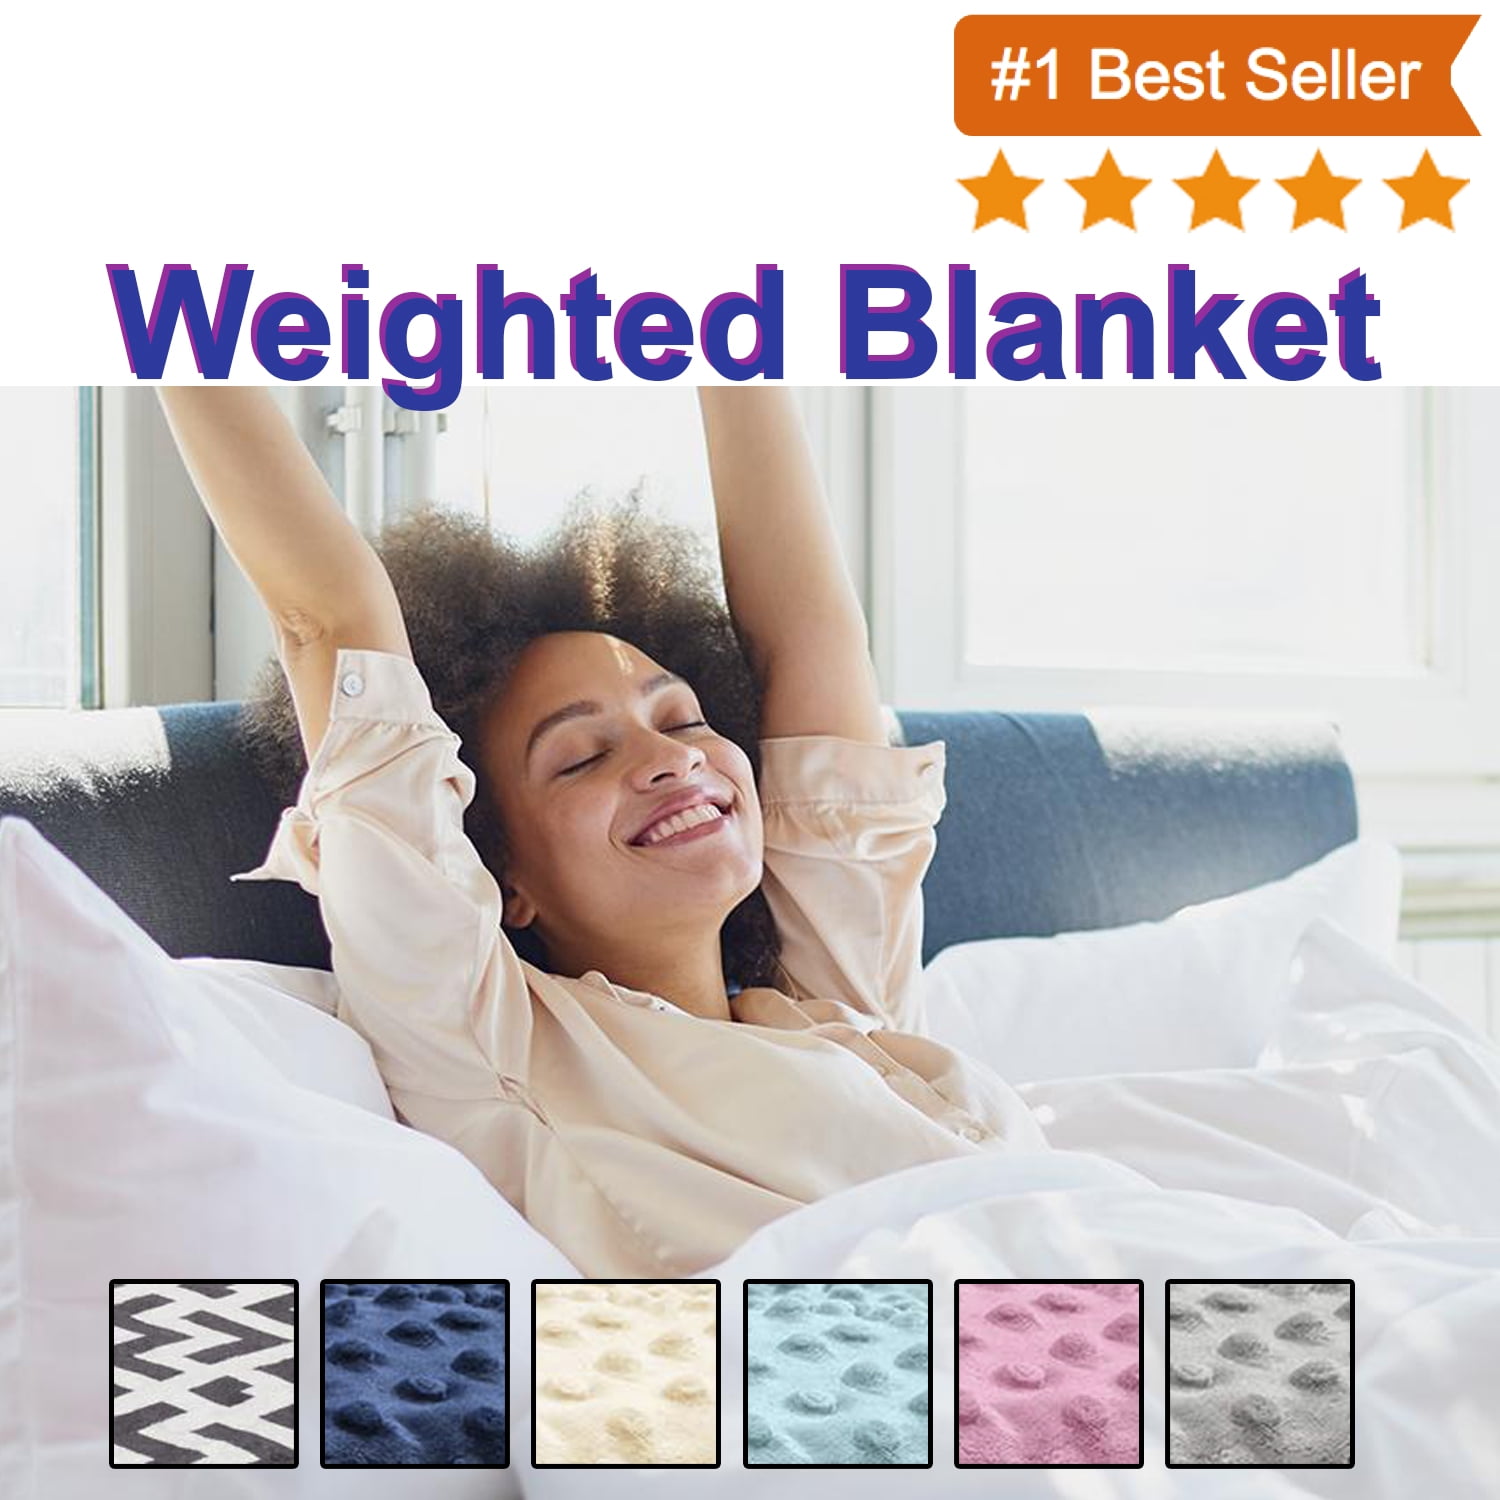 Weighted Blanket 15 LBS | Light Grey Cotton Blanket + Pink Minky Cover